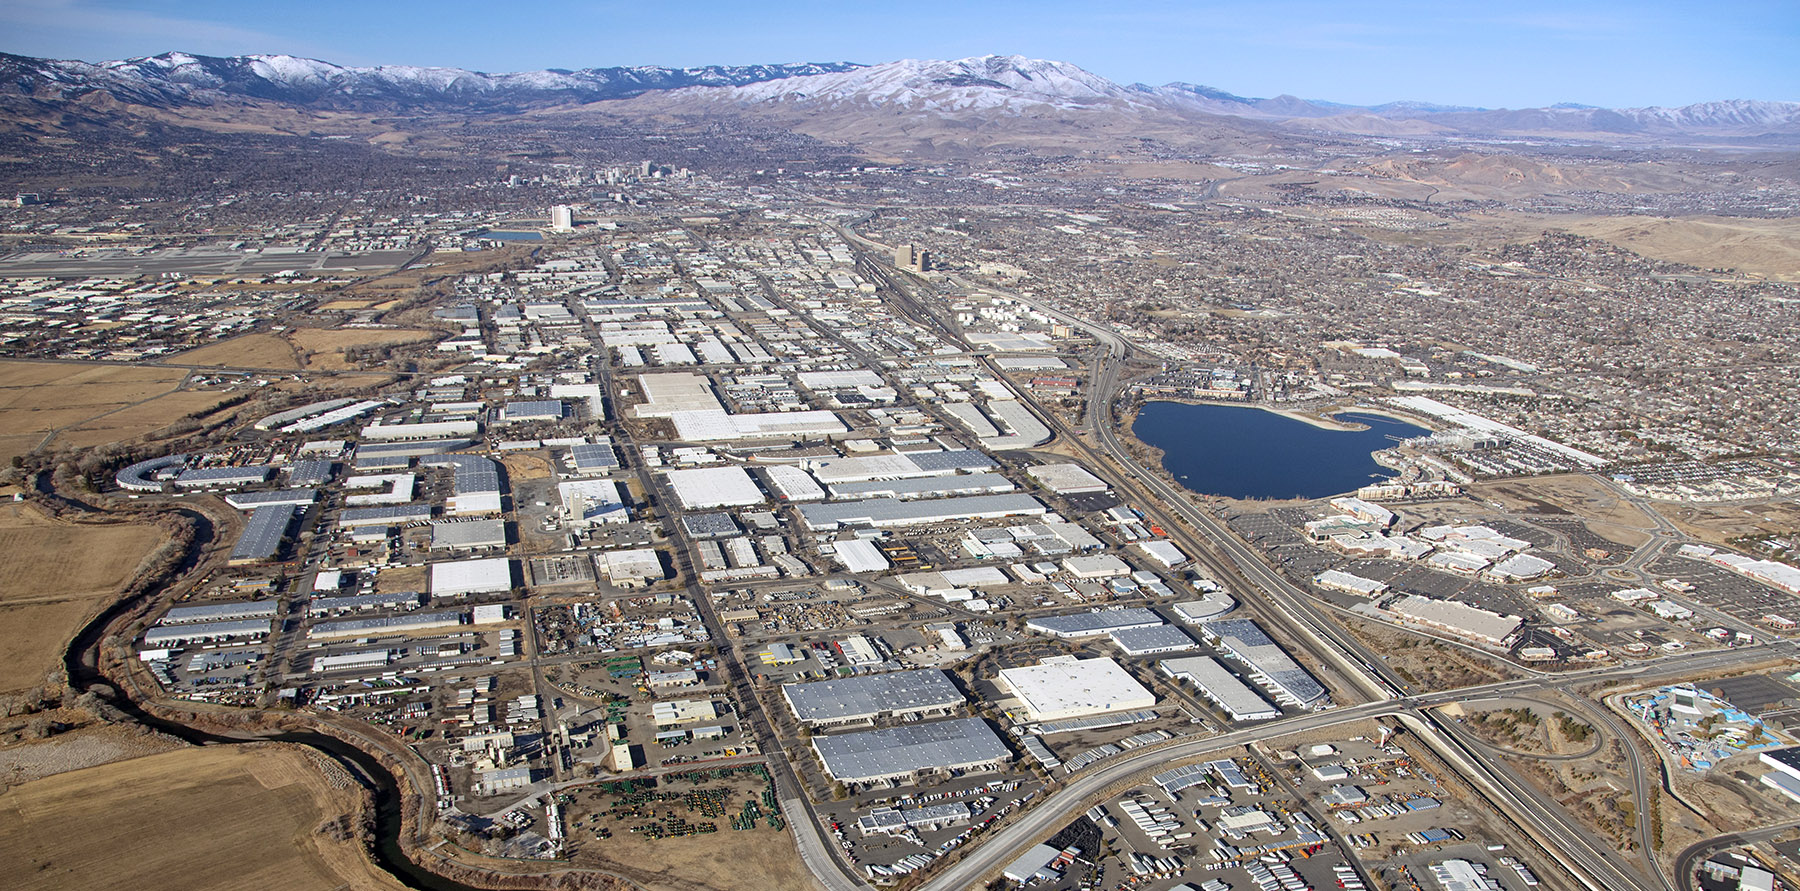 Aerial view of sparks, NV Industrial and warehouse areas